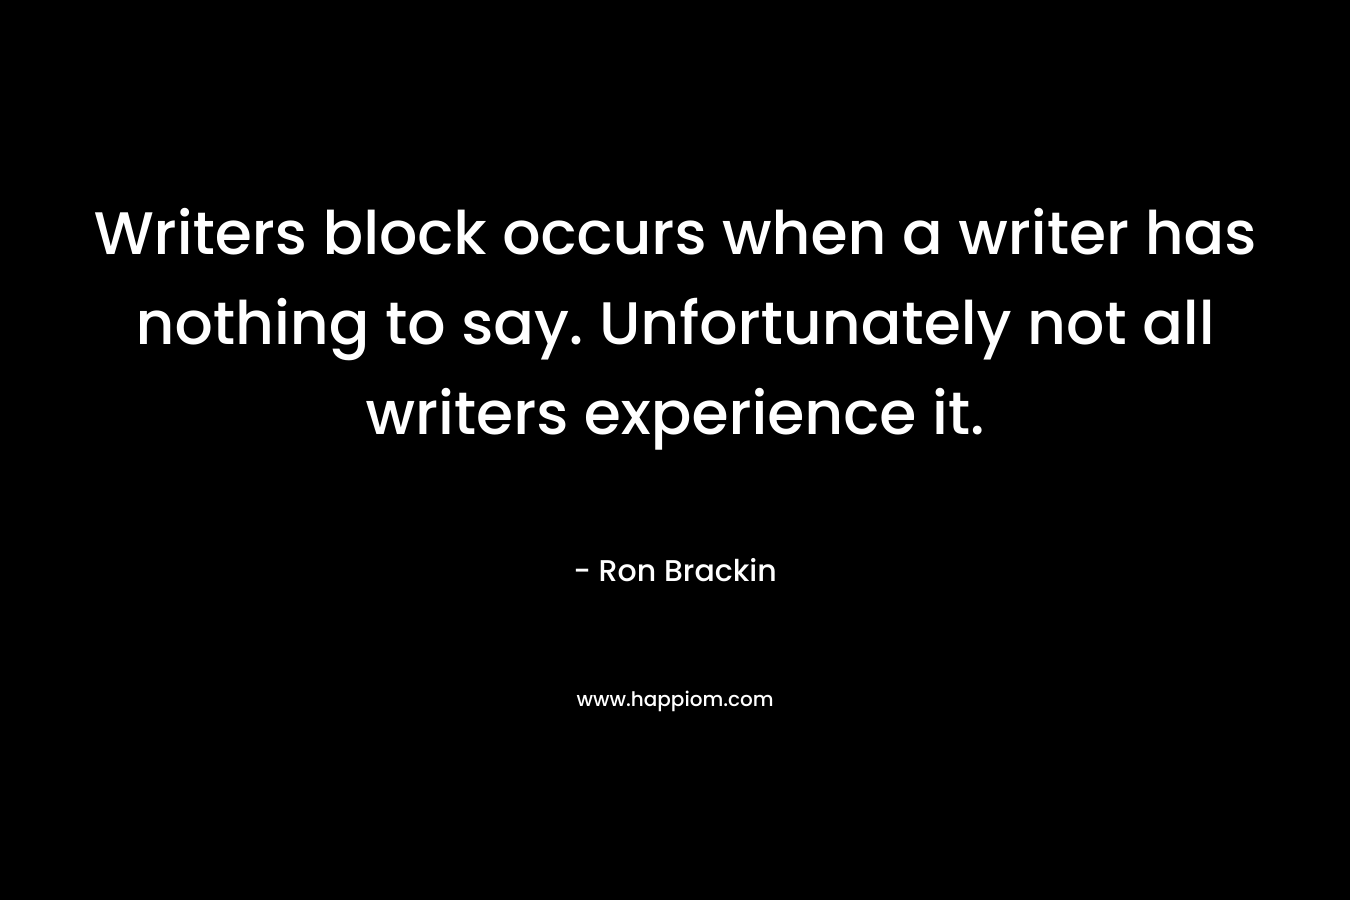 Writers block occurs when a writer has nothing to say. Unfortunately not all writers experience it.